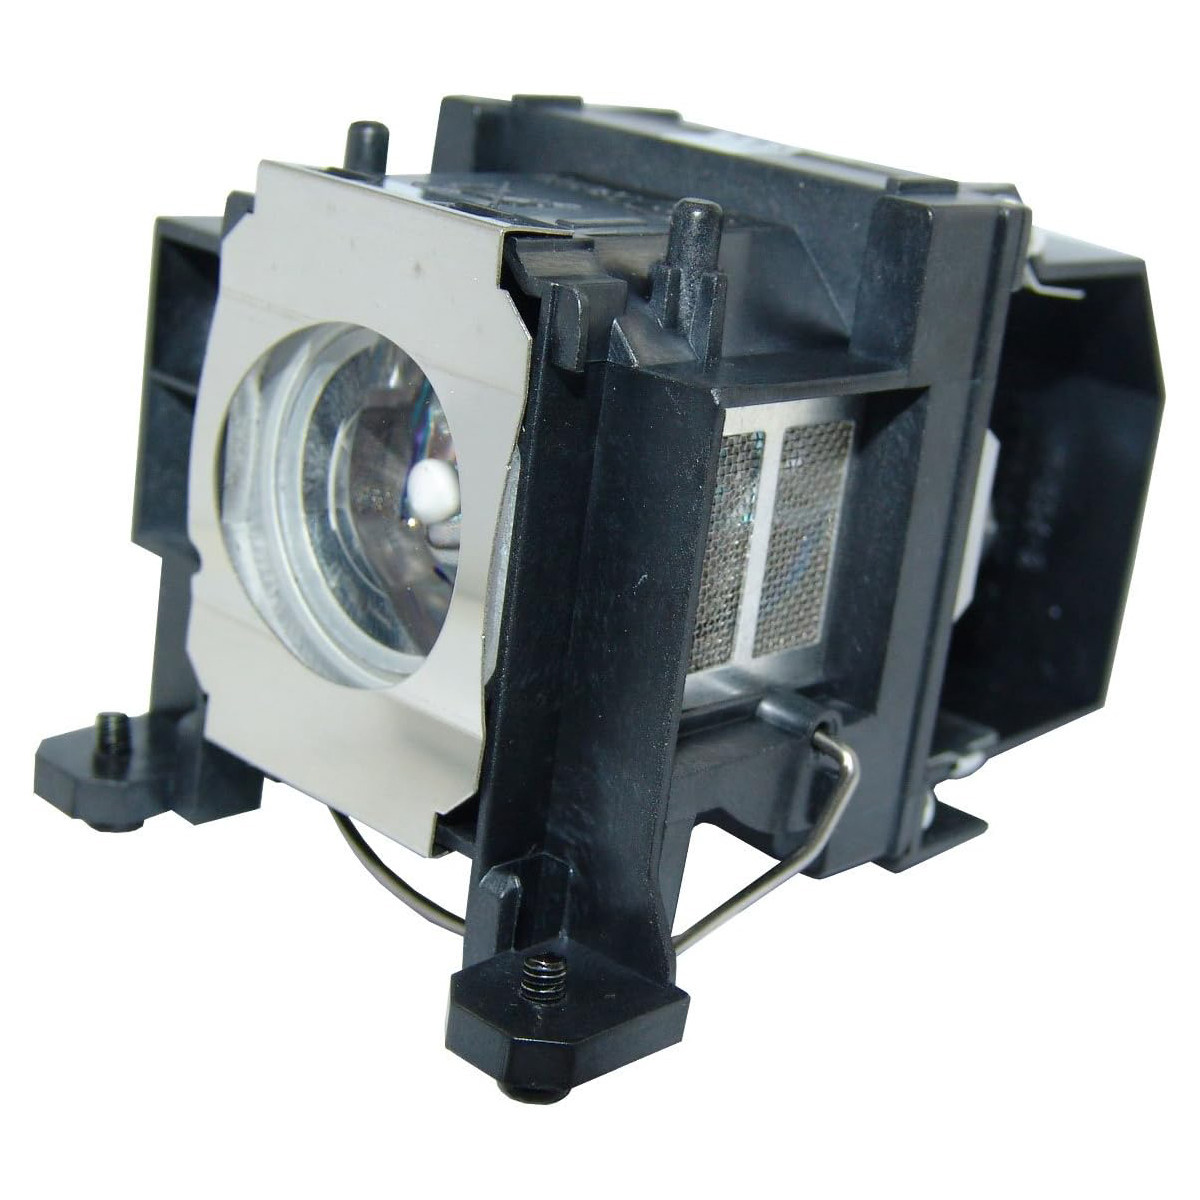 Replacement Projector lamp ELPLP48 For Epson EB-1700 EB-1720 EB-1720C EB-1723